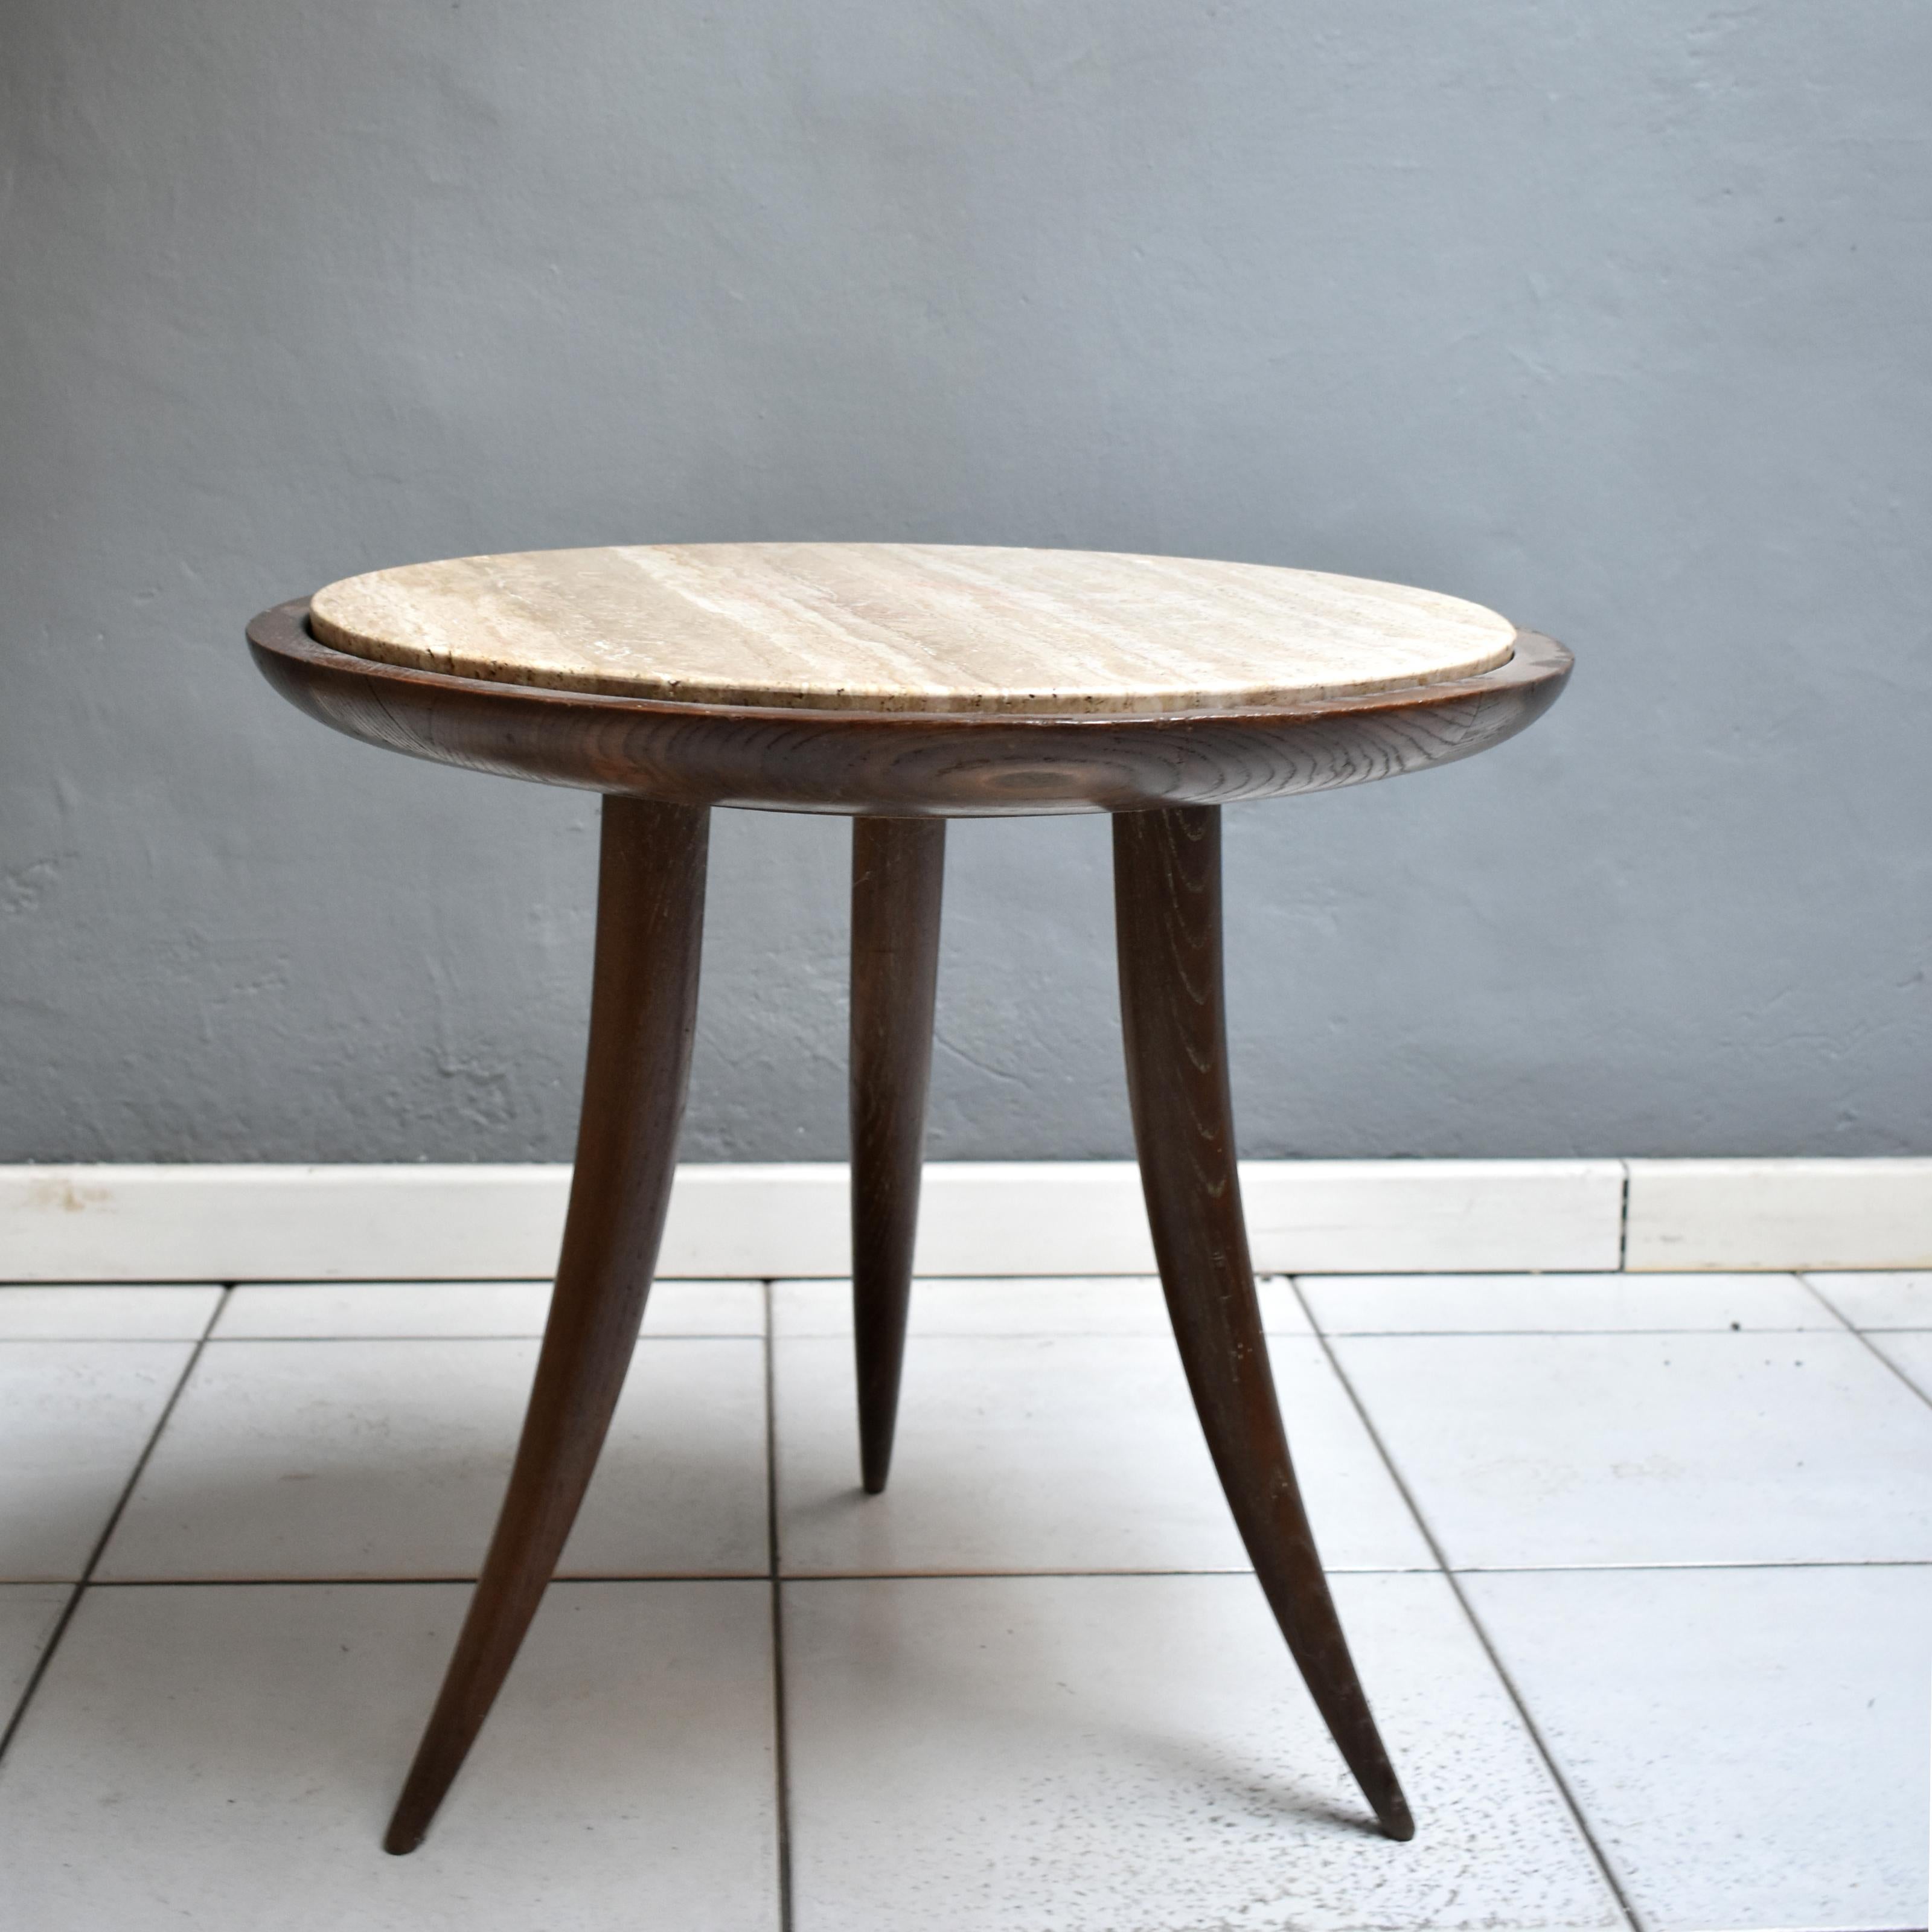 1950s Italian Round Coffee Table in Wood and Travertine Marble Top For Sale 4